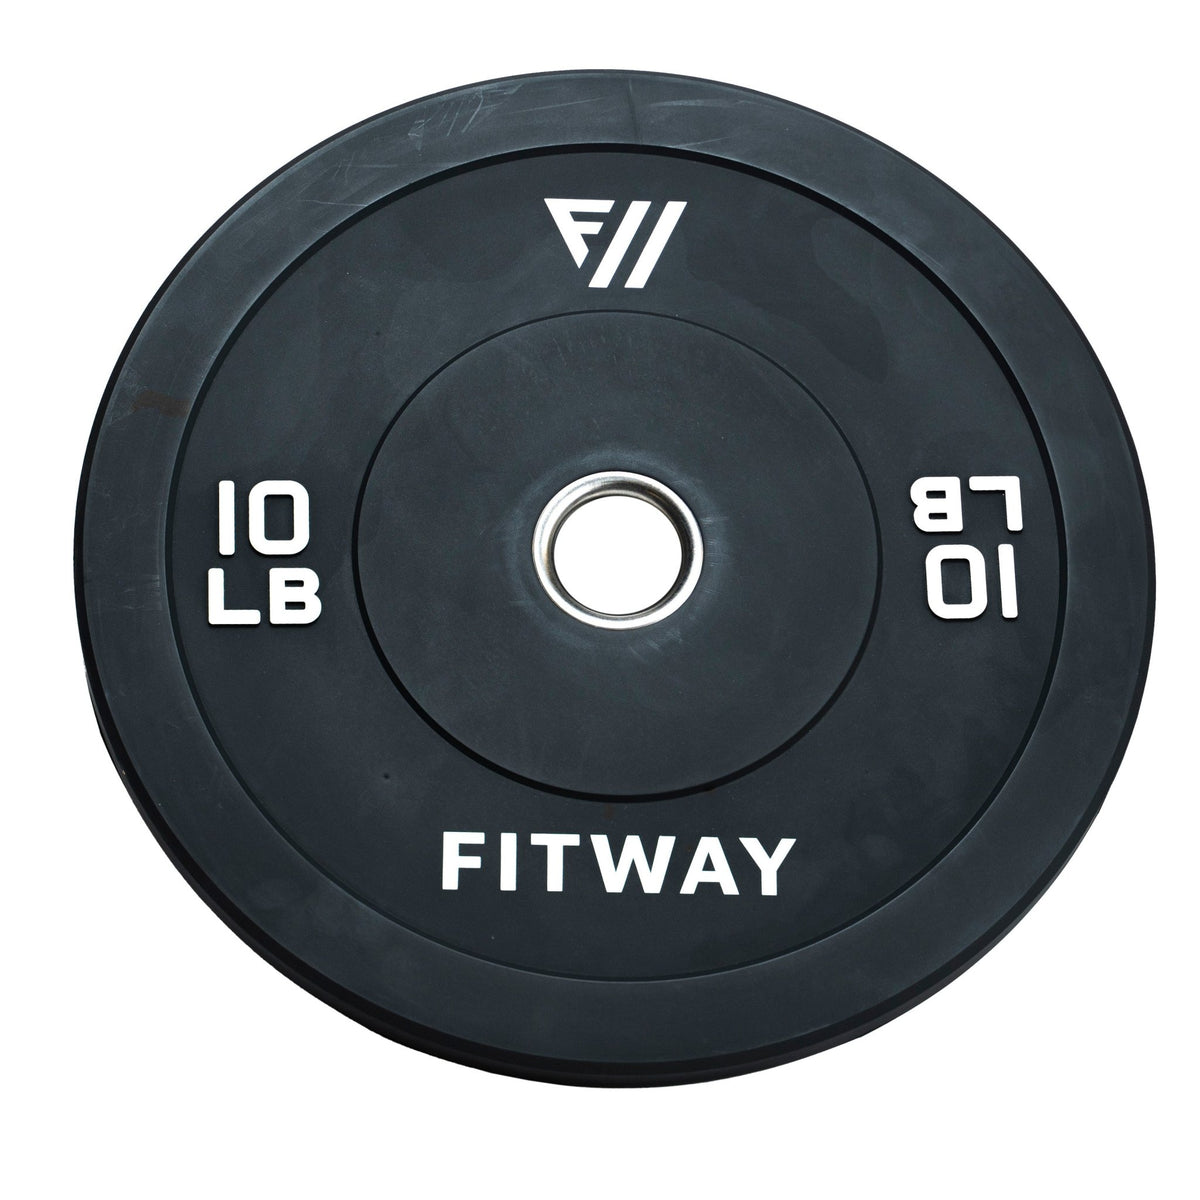 FitWay Equip. 10lb Olympic Rubber Bumper Plate | Fitness Experience